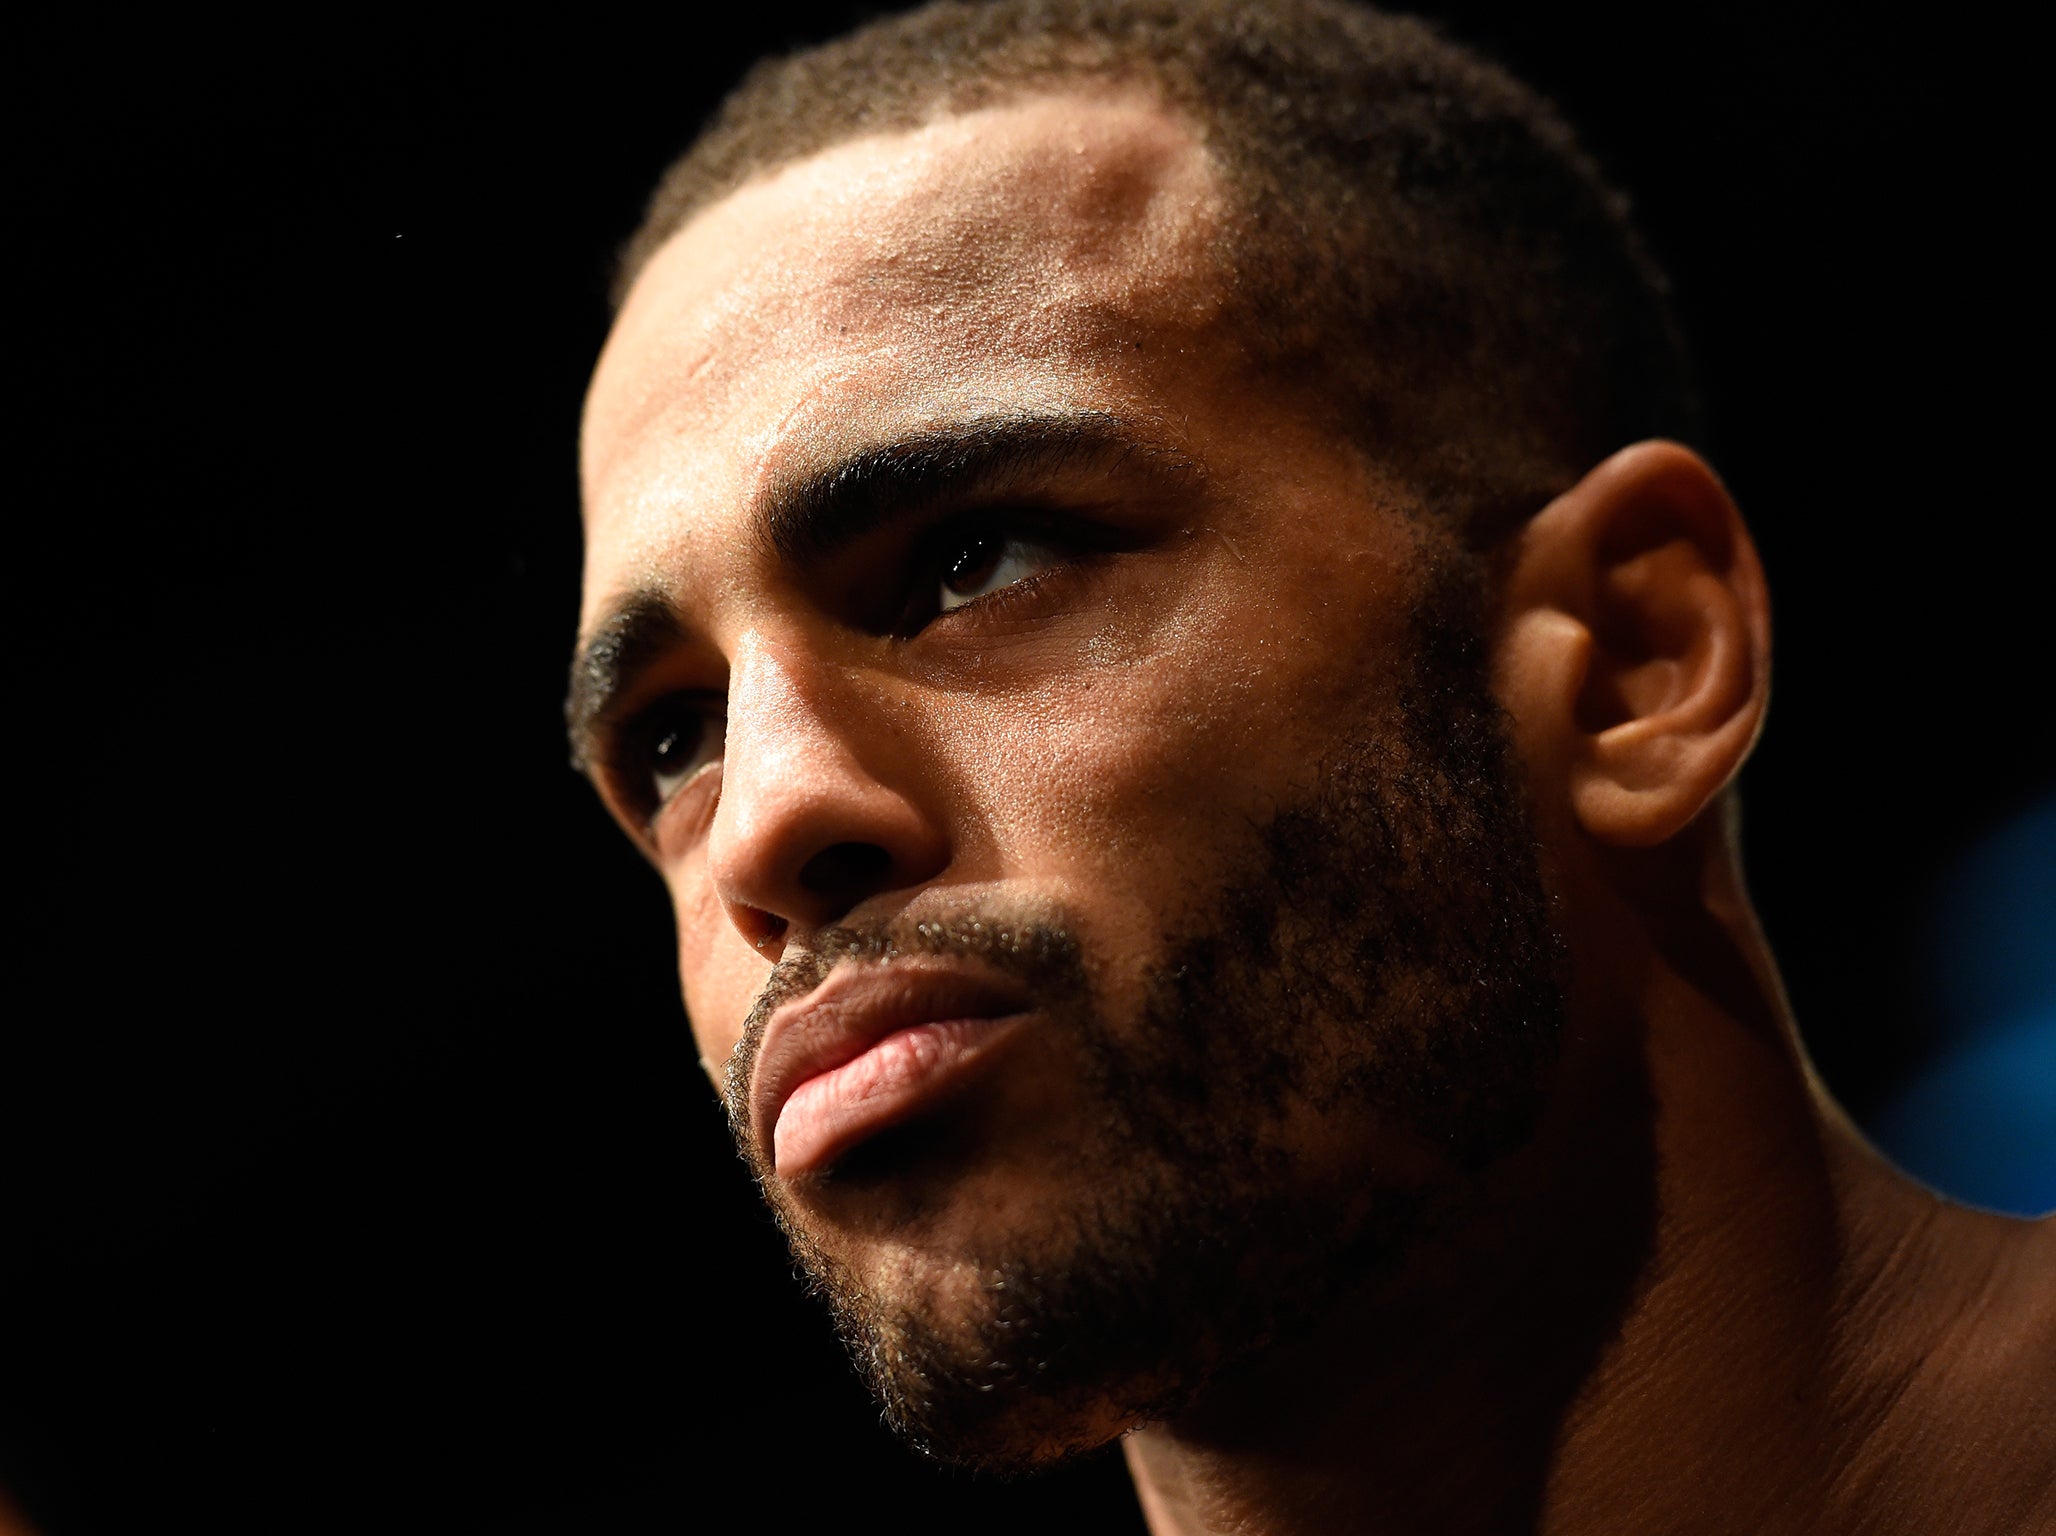 Danny Roberts takes on Nordine Taleb this weekend